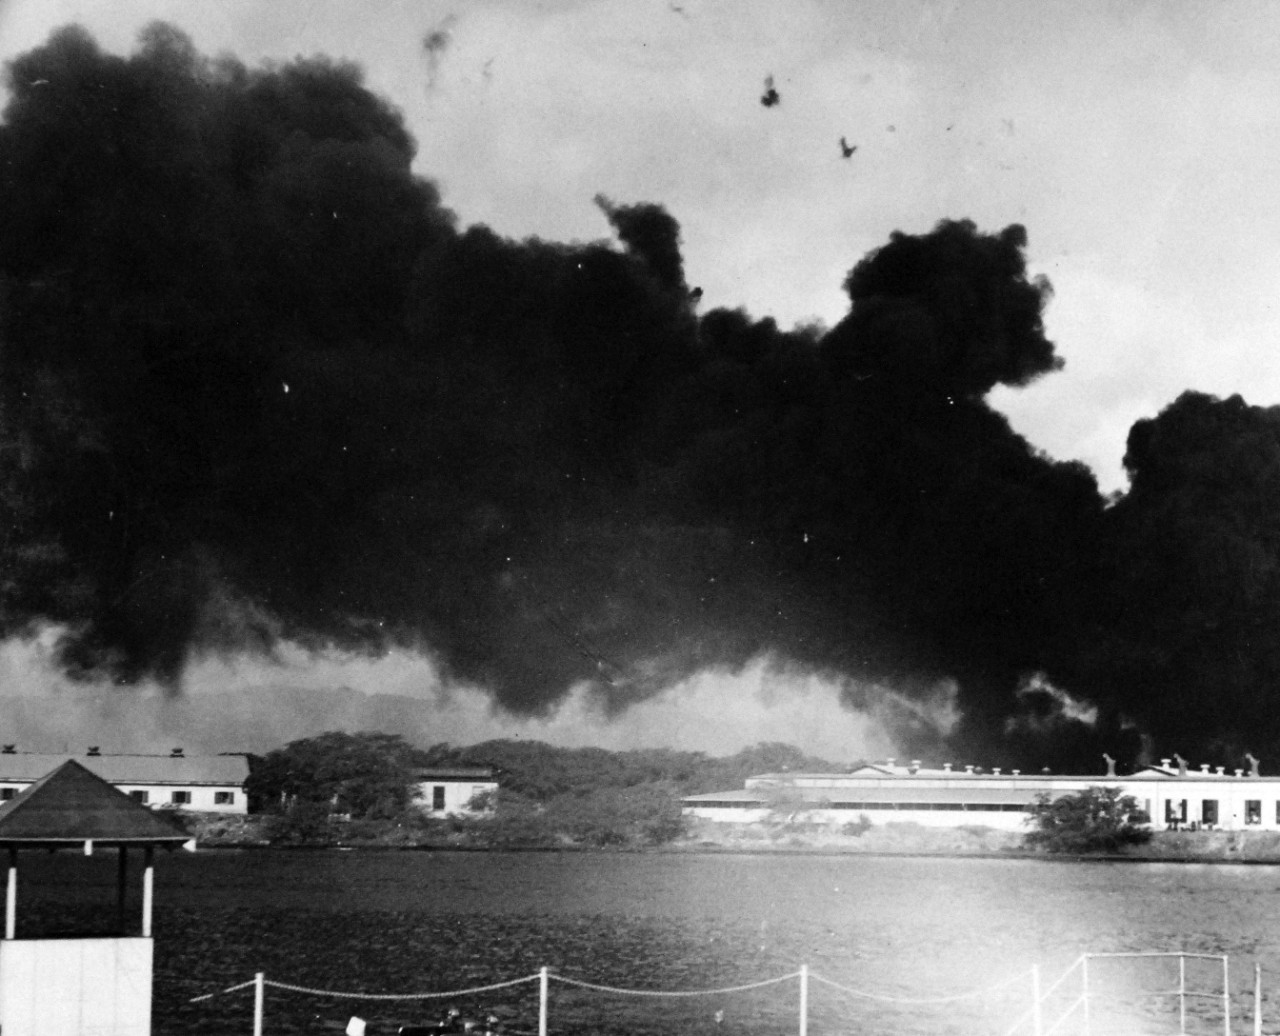 80-G-32731:   Japanese Attack on Pearl Harbor, December 7, 1941.   Oil flames resulting from the attack.  This view looks toward Magazine Island from the Submarine Base.  Note the enemy plane in dive bomb attack as fire burns nearby. Official U.S. Navy photograph, now in the collections of the National Archives.           (9/9/2015).